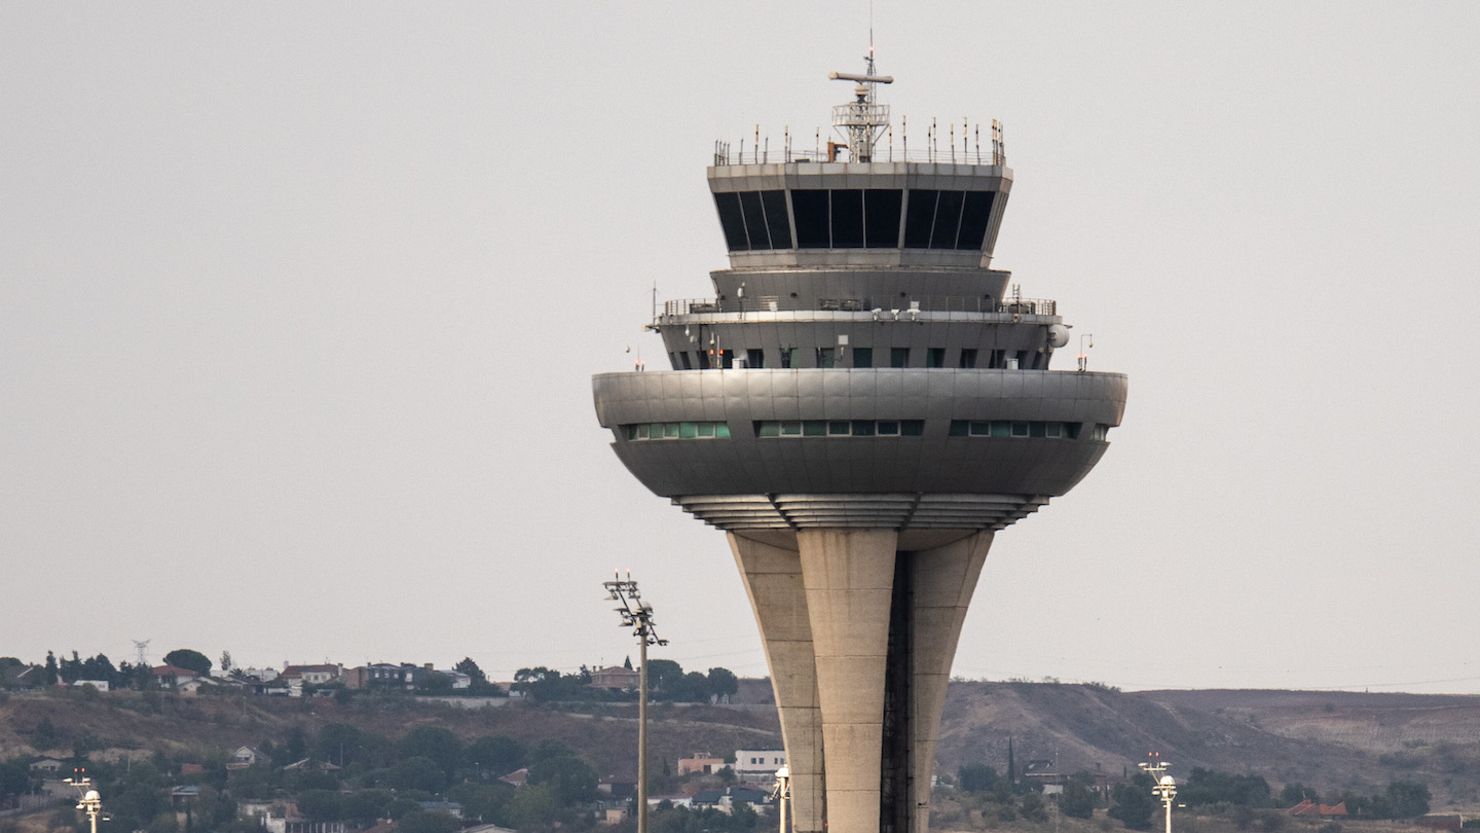 A Ryanair airplane in seen on the runway at Adolfo Suarez Madrid Barajas Airport passing by the air traffic control tower.